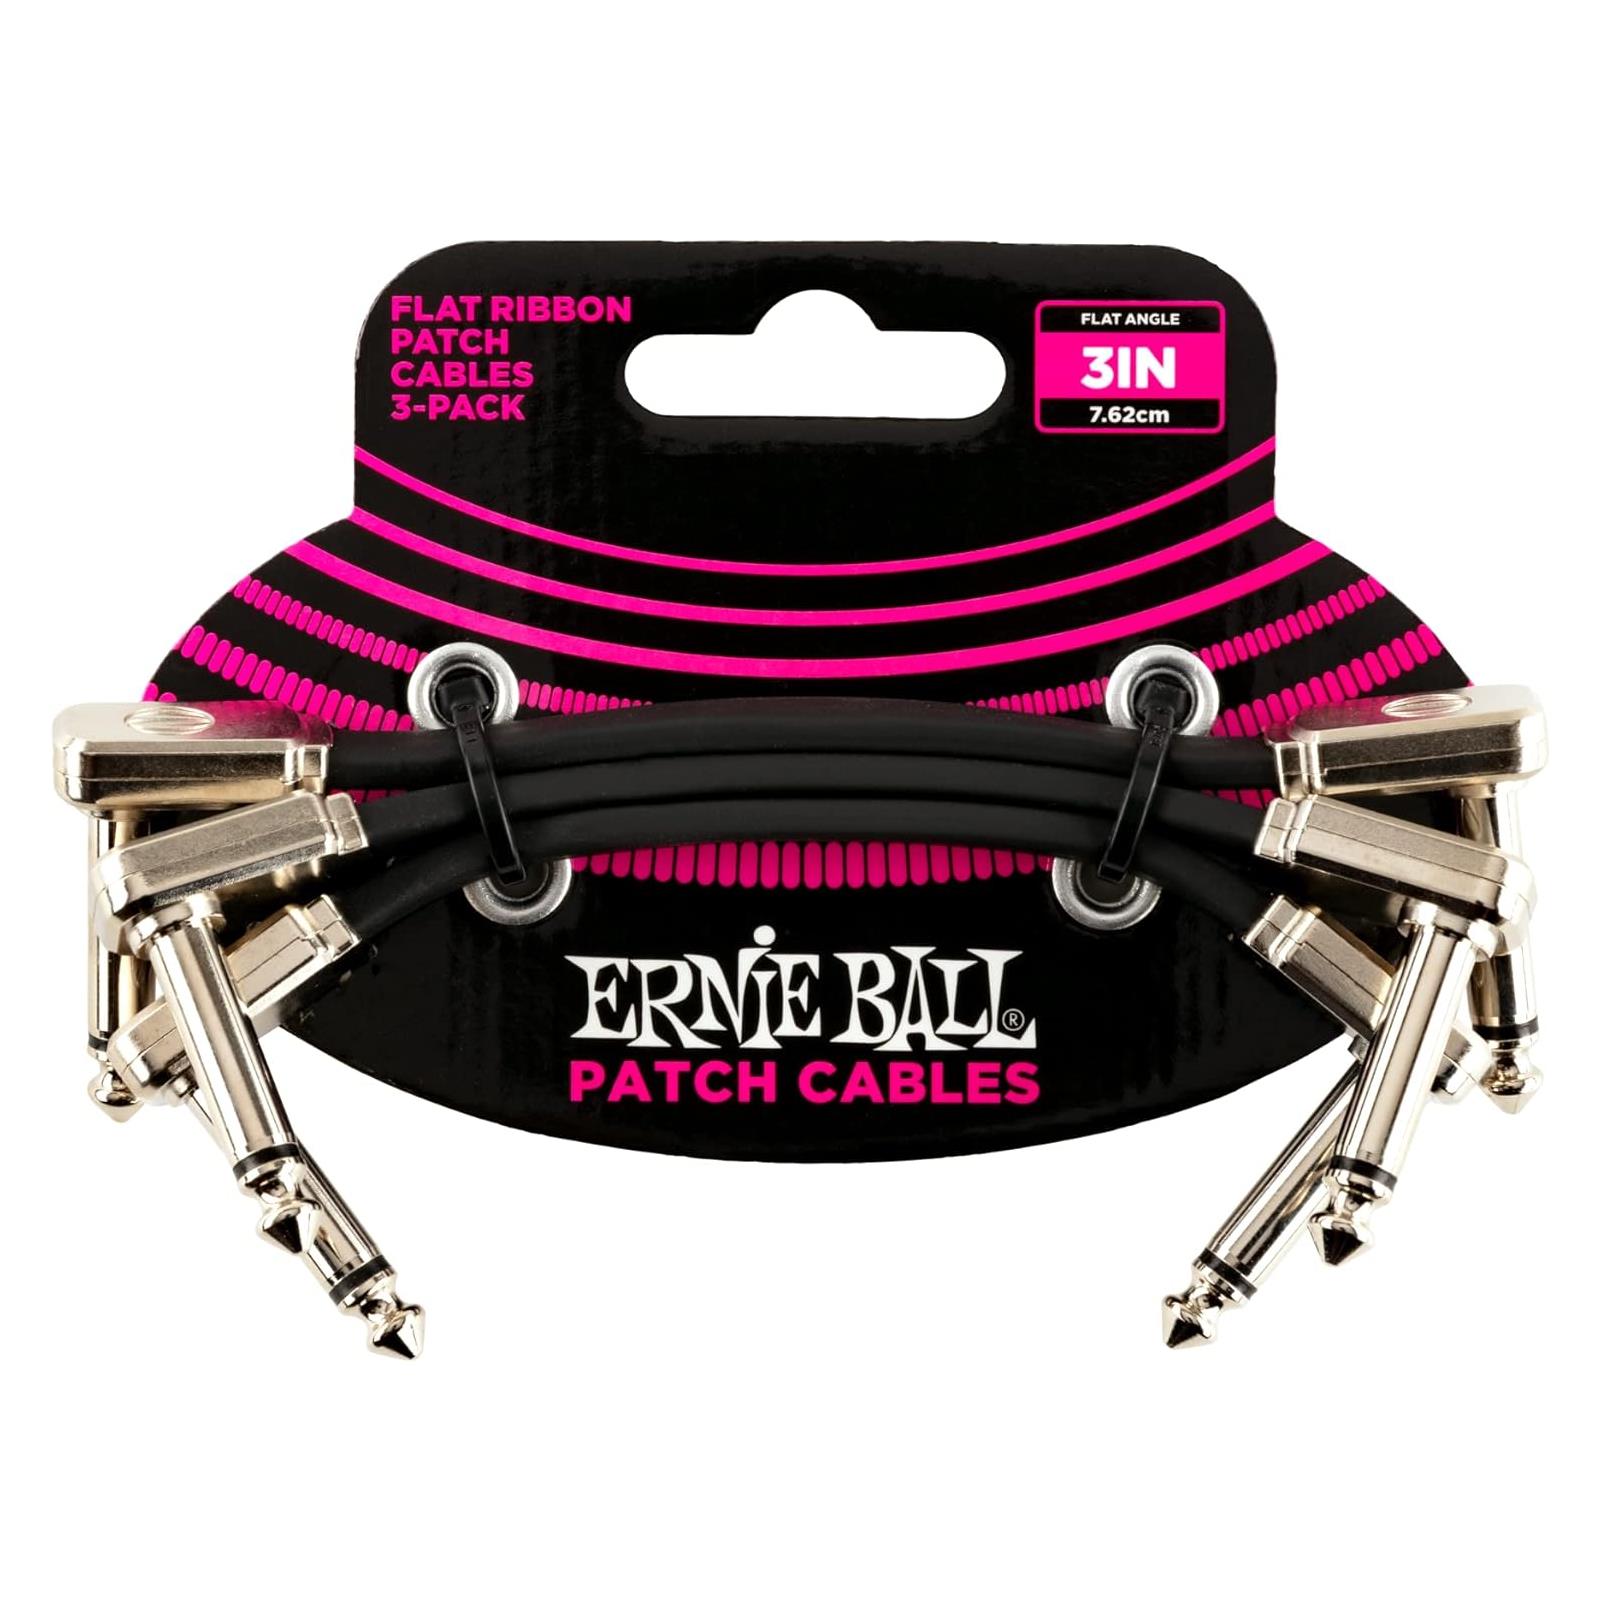 Ernie Ball 3" Flat Ribbon Patch Cable 3-Pack - Black